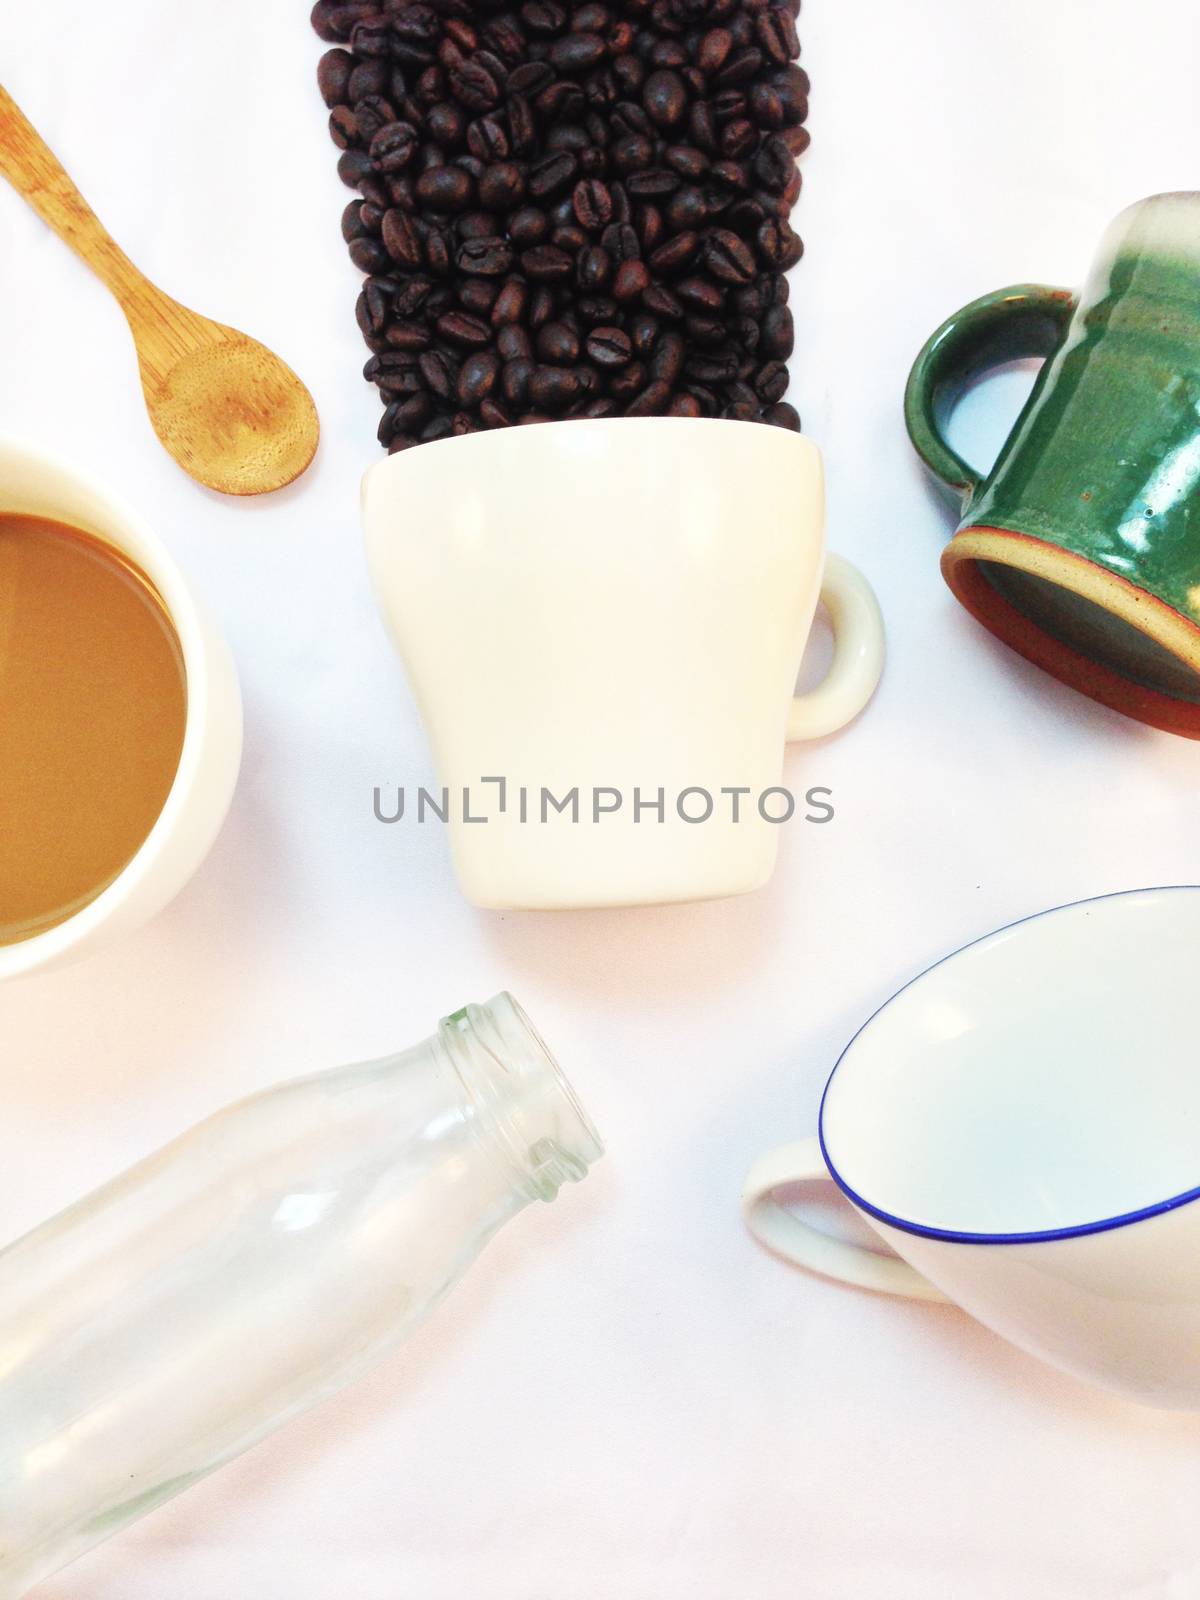 Cup of coffee, bottle and wooden spoon on white background